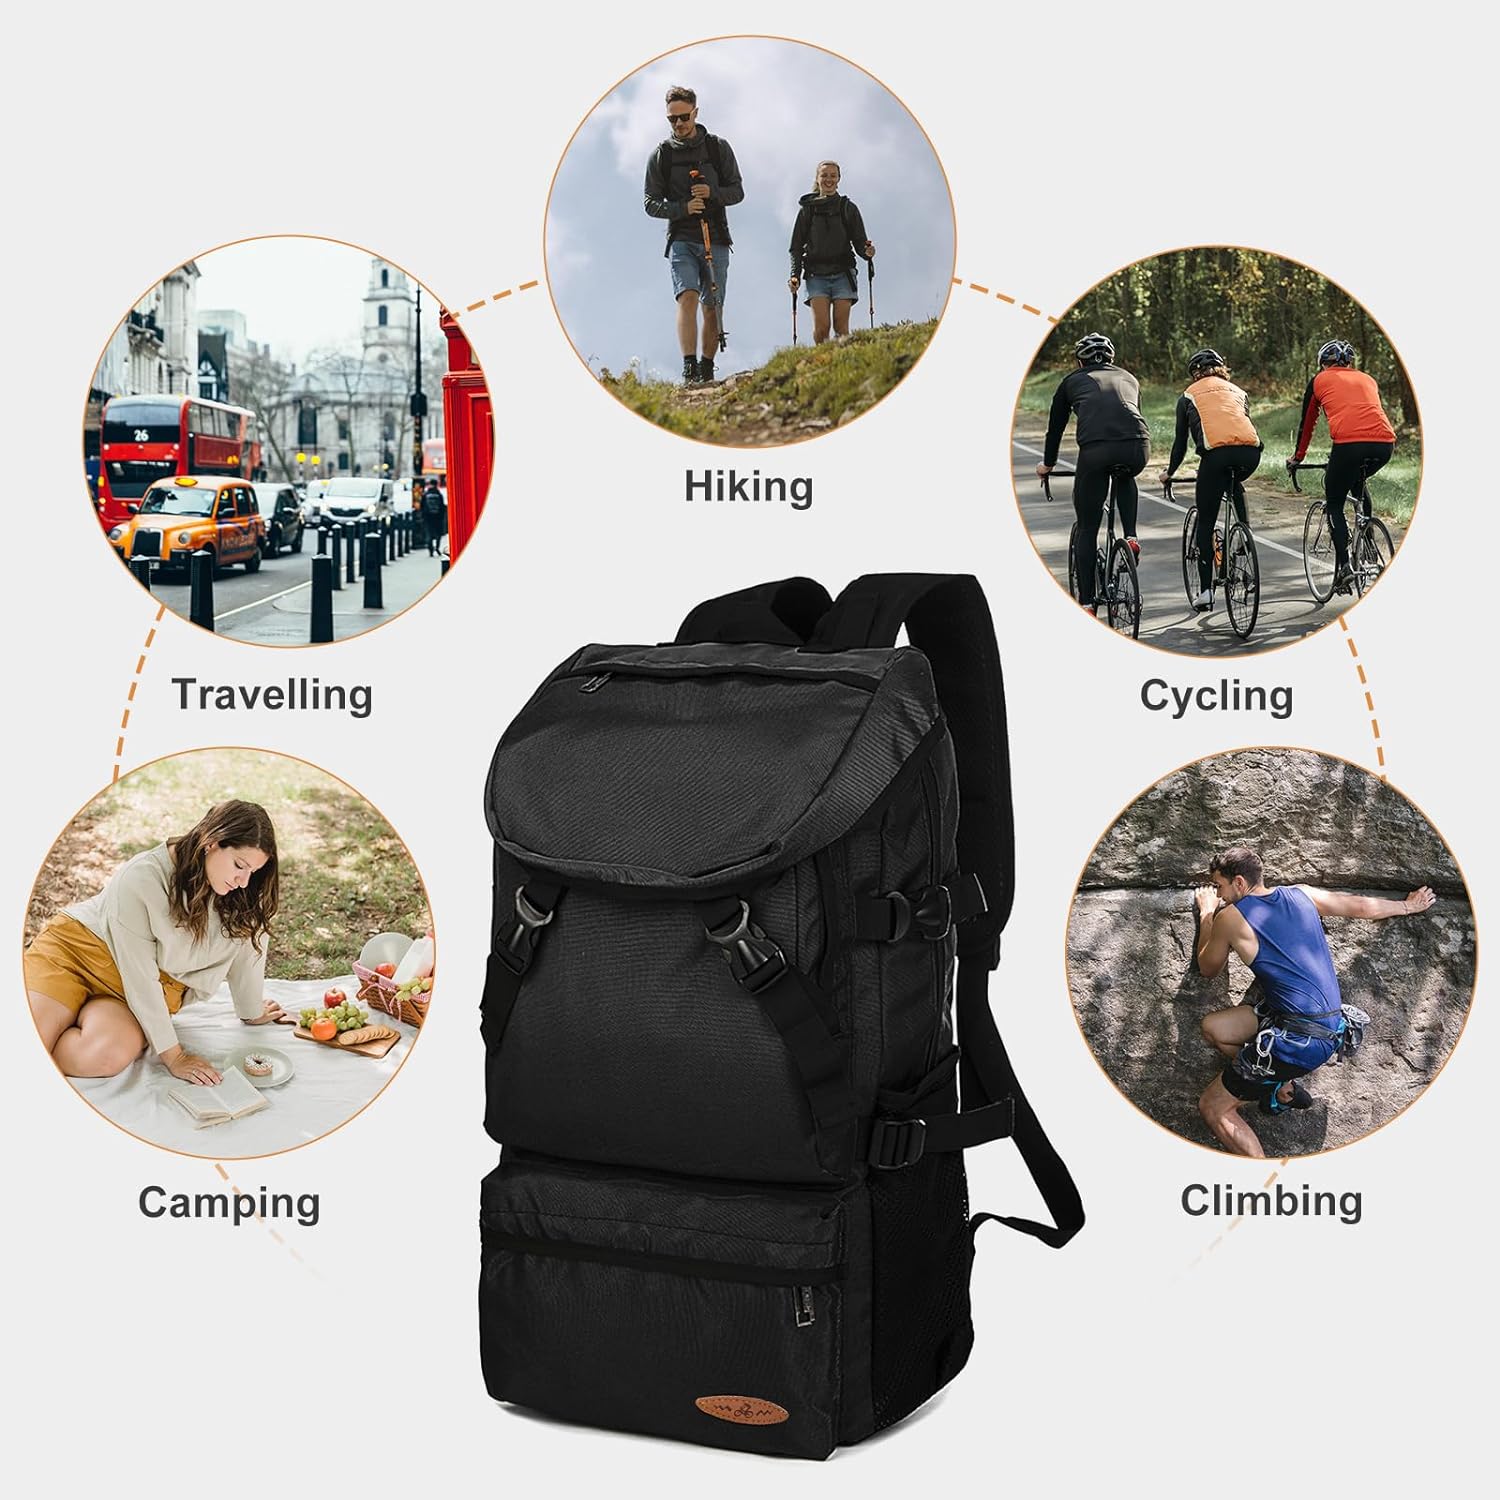 VGCUB Large Travel Camping Hiking Backpack,Lightweight Waterproof Outdoor Sports Rucksack Gym Carry on Backpack Daypack for Women Men Traveling, Black